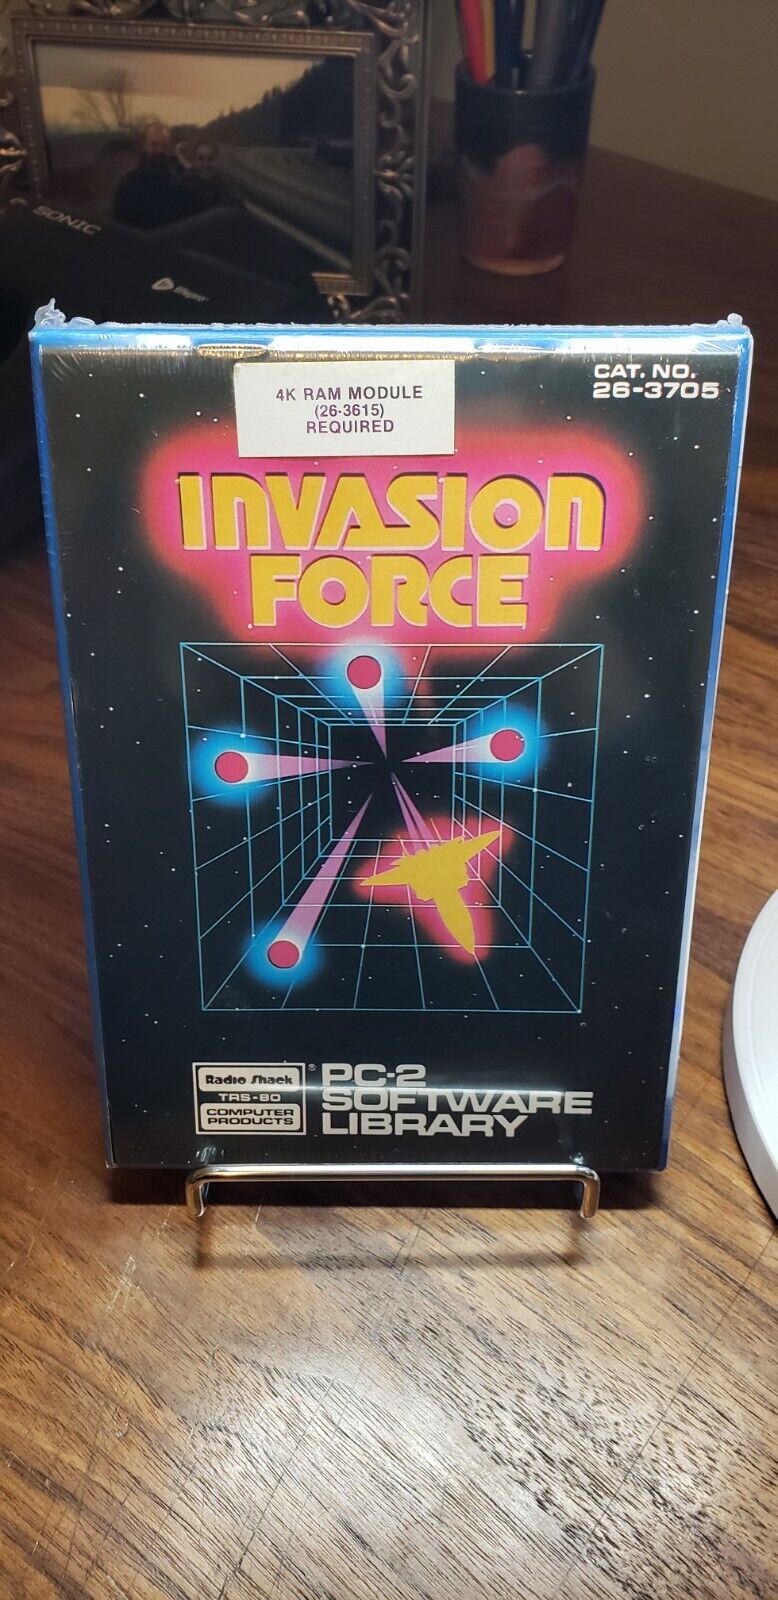 Invasion Force Video Game SEALED Radio Shack TRS-80 PC-2 CAT.NO. 26-3705